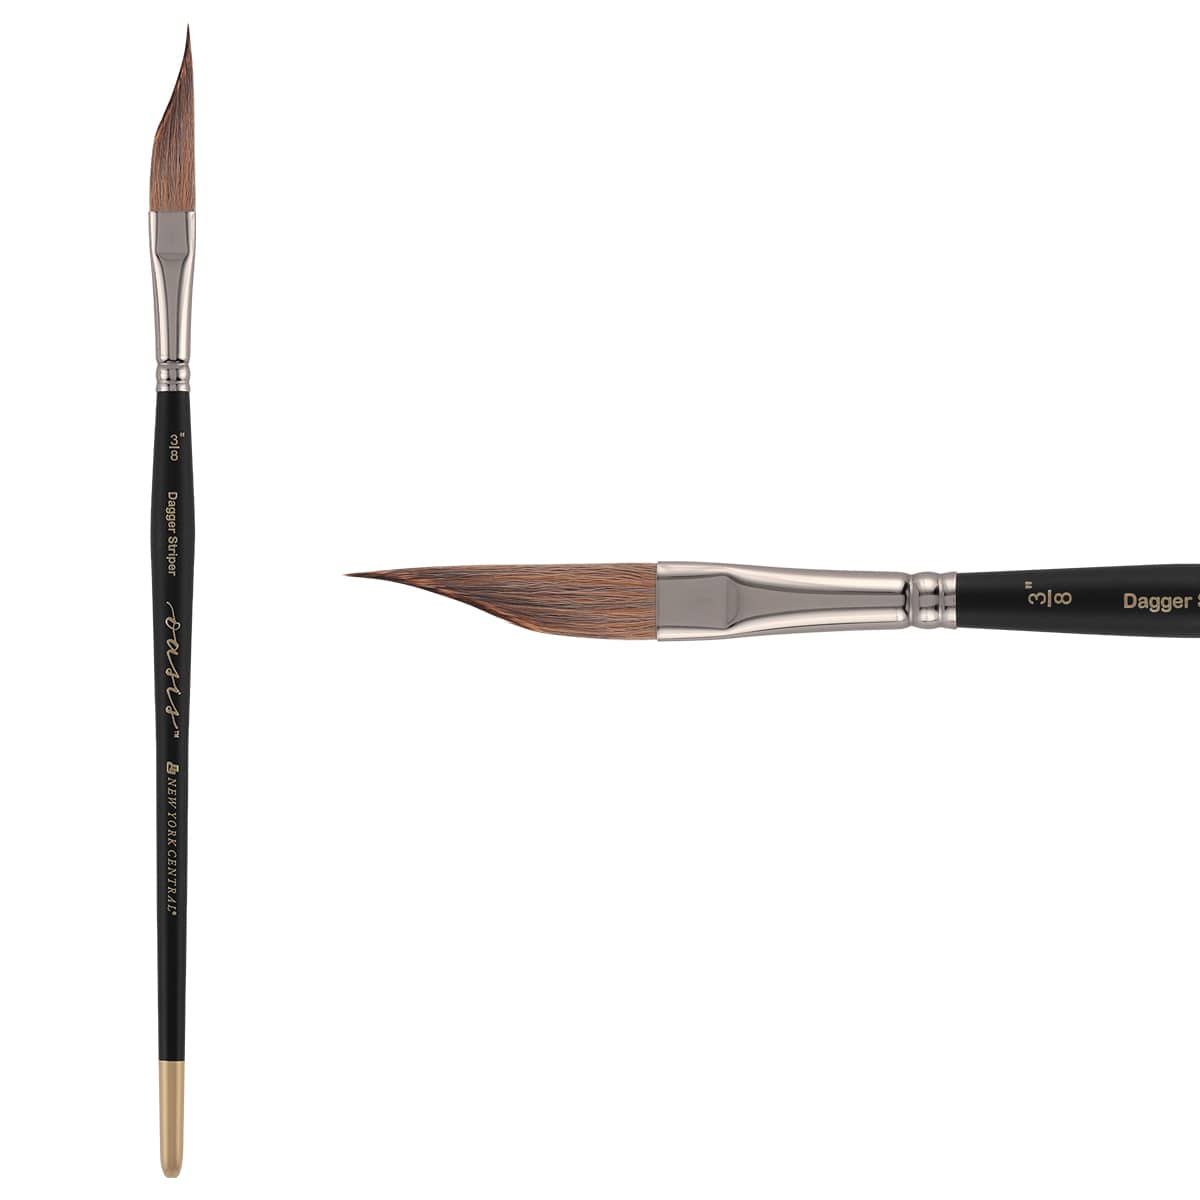 Necessities™ Brown Synthetic Watercolor Brushes By Artist's Loft